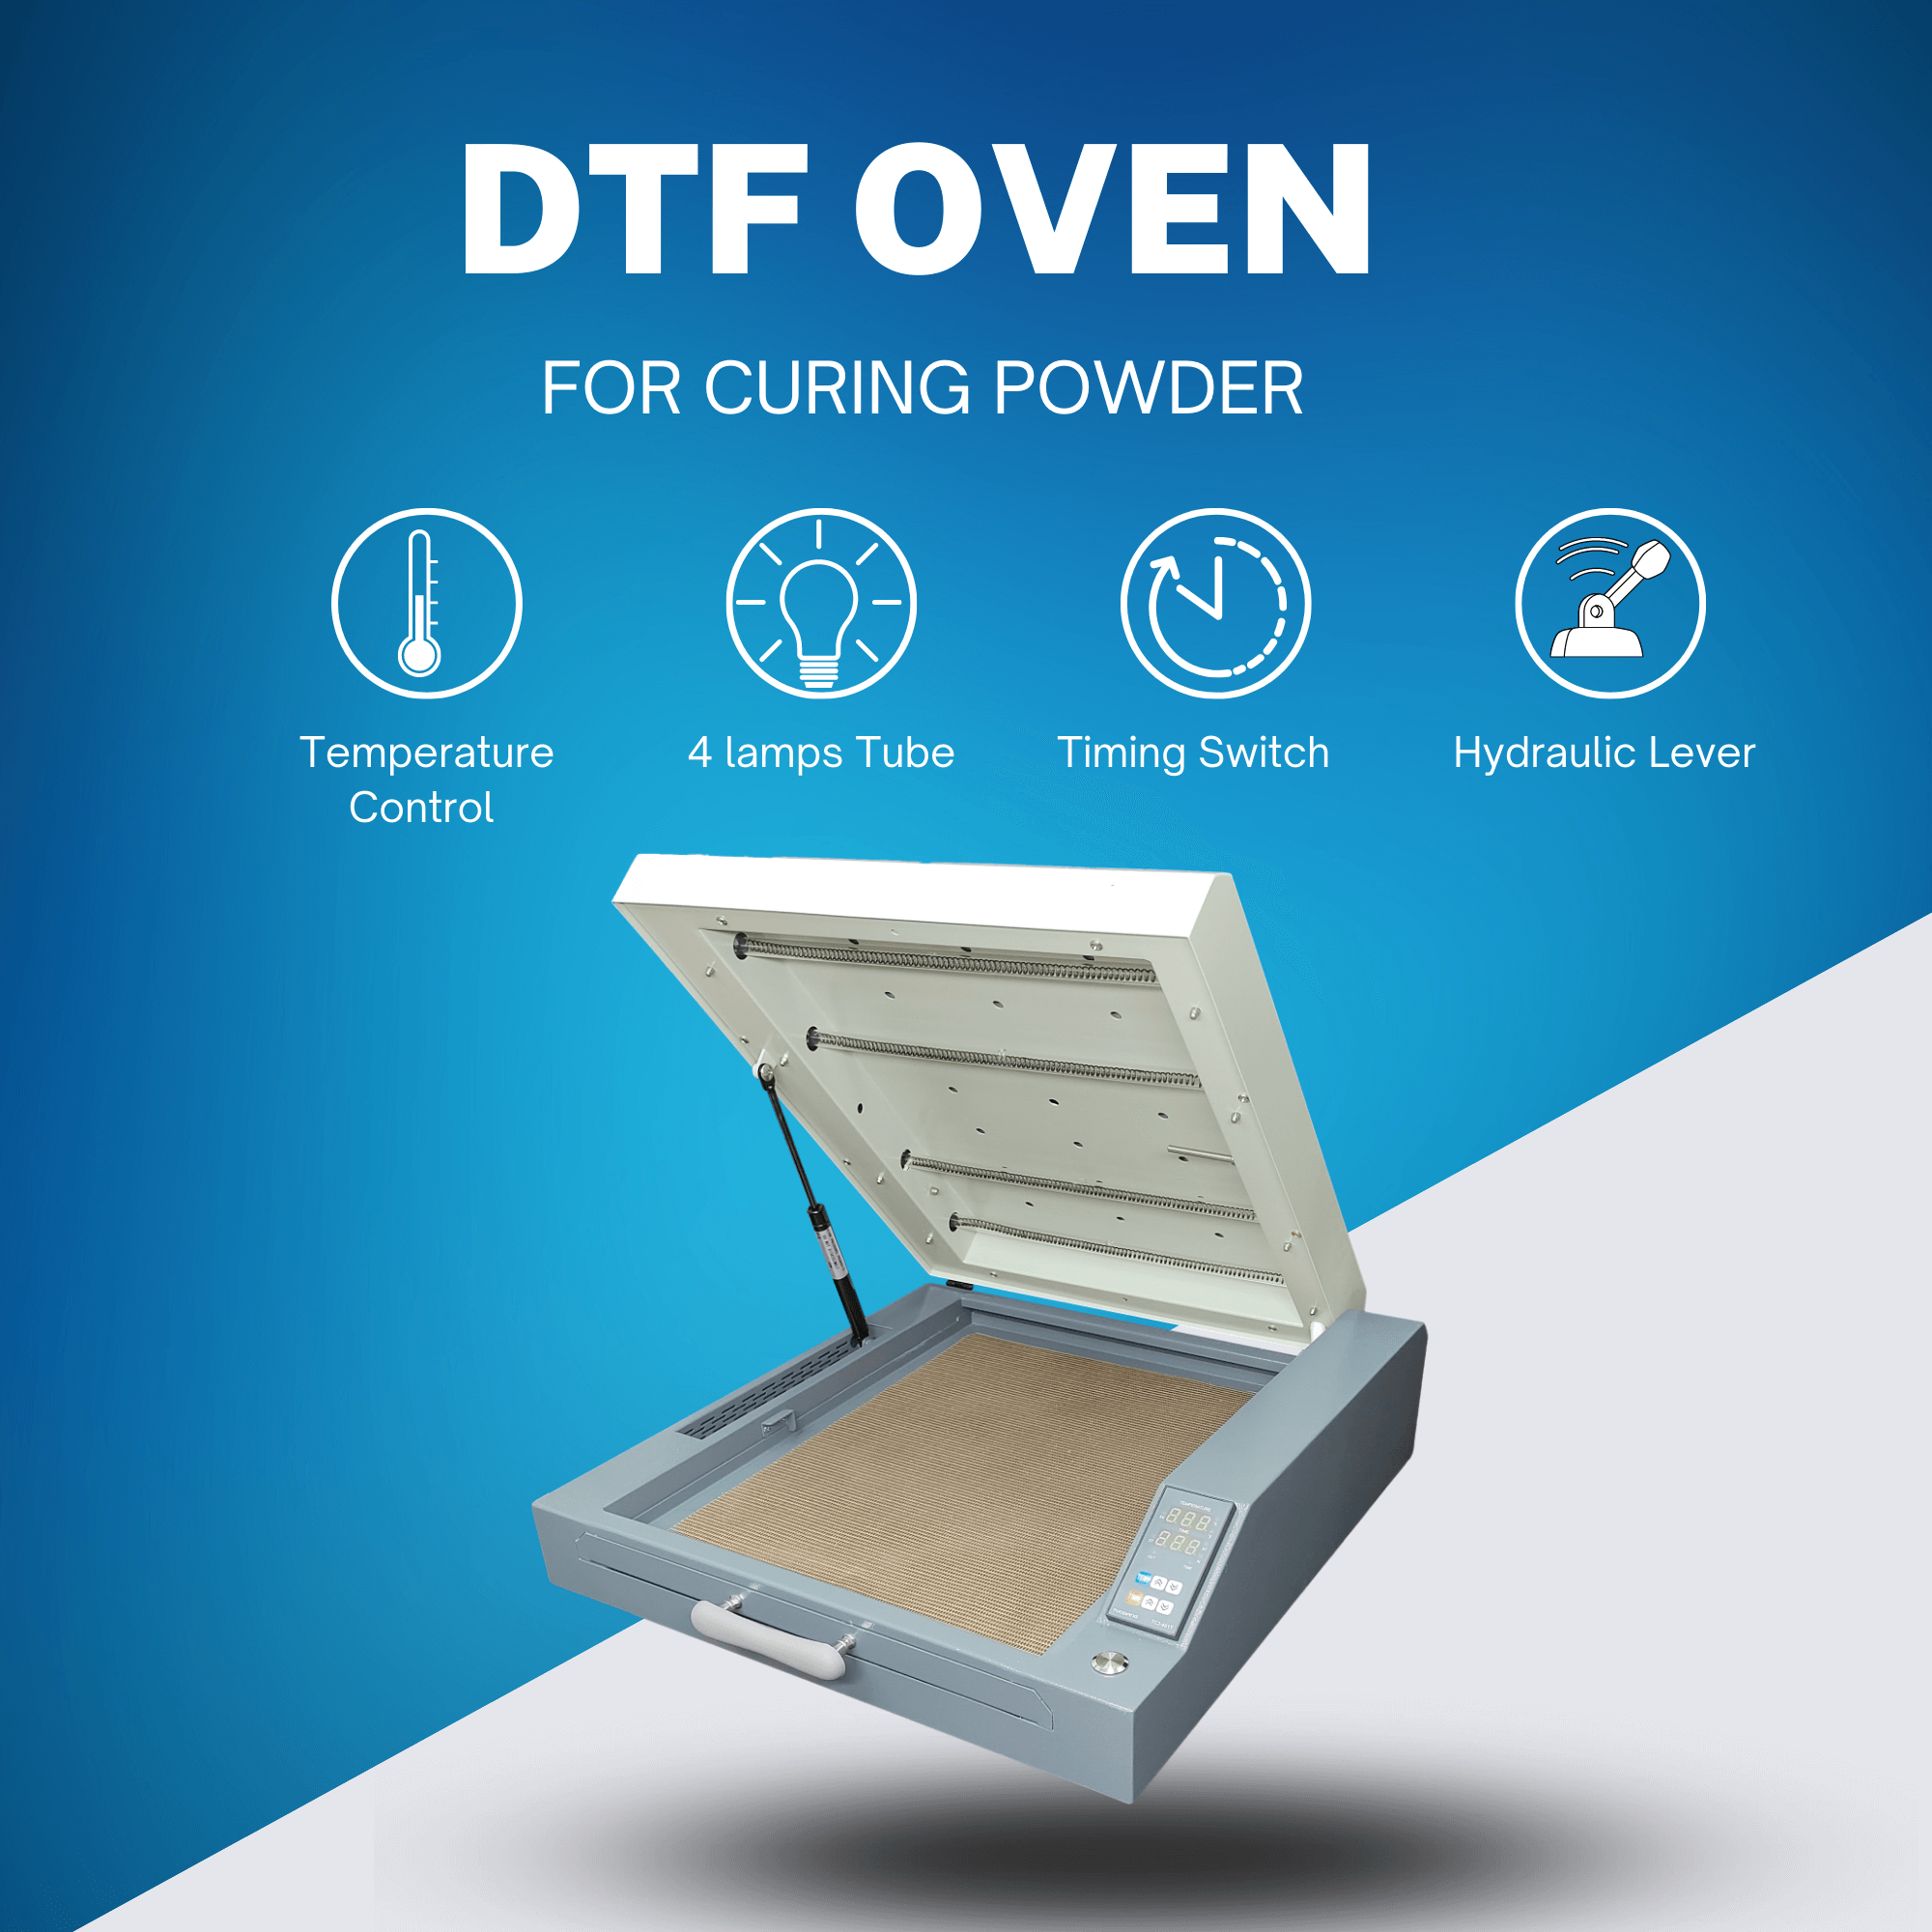 Gallery DTF Small Curing Oven and Air Filter for 13” Film